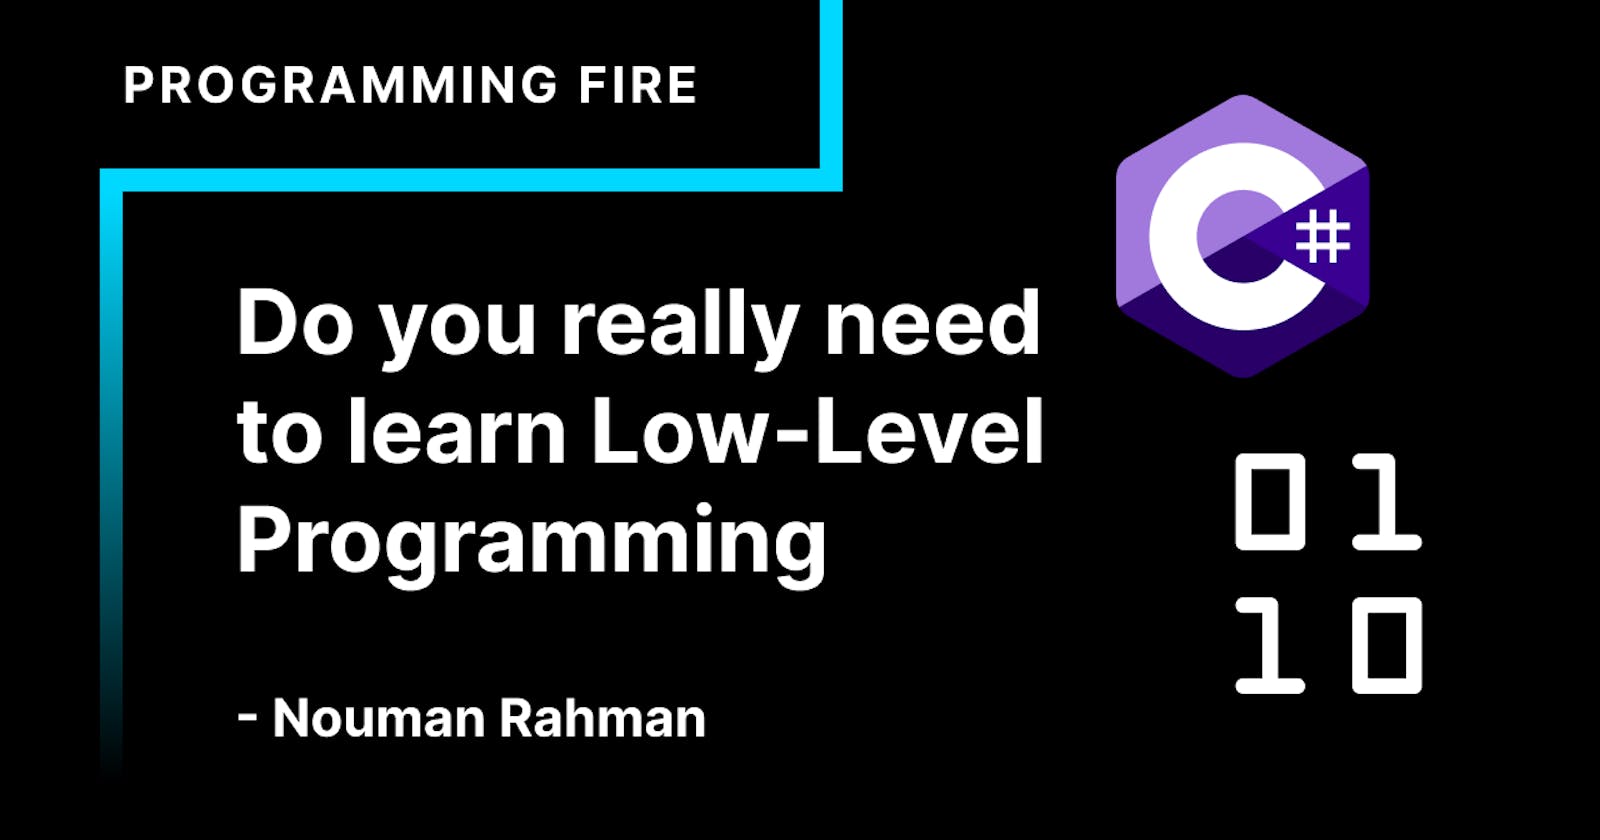 Do you really need to learn Low-Level
Programming